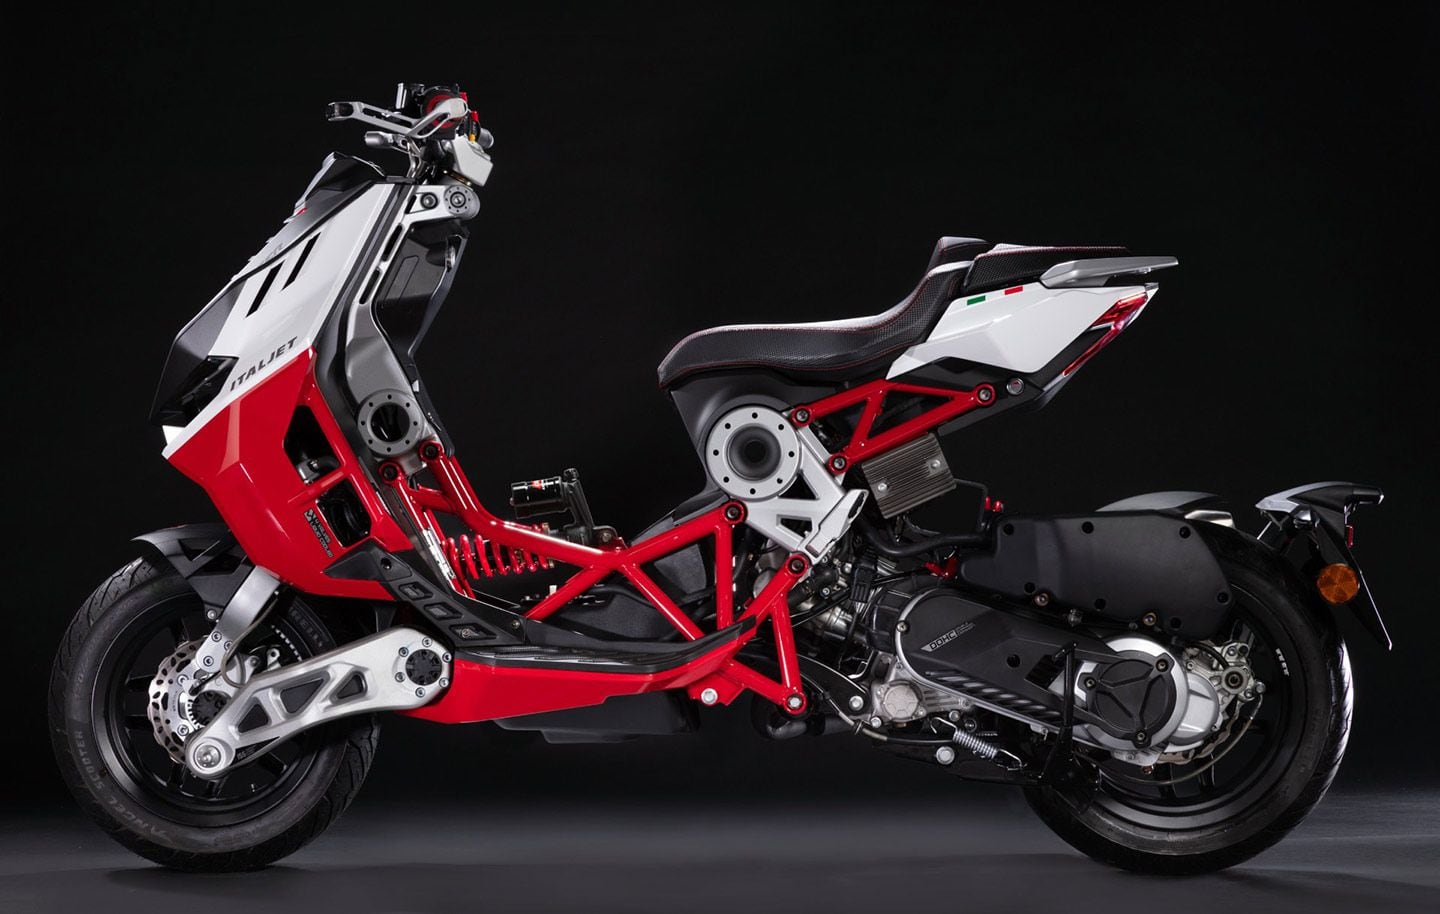 Front and rear swingarms are nothing new on the Italjet Dragster scooter.